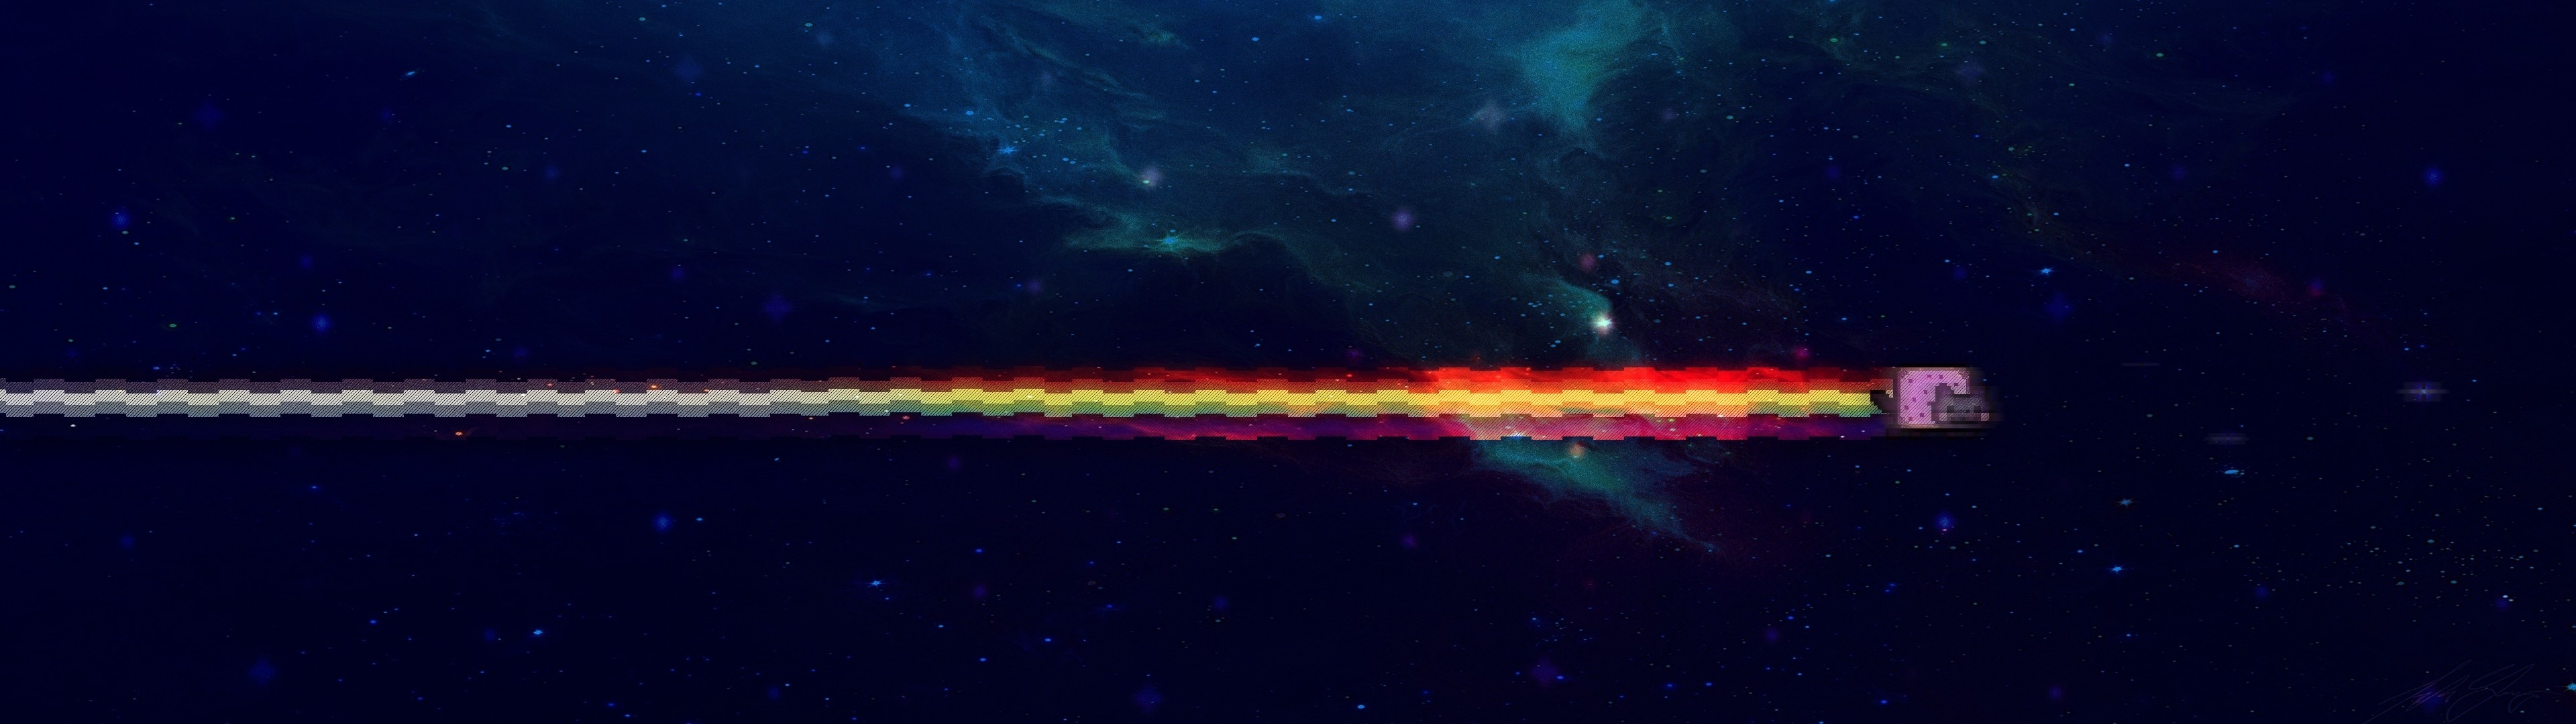 3840x1080 Download Wallpapers, D... Nyan Cat No Background